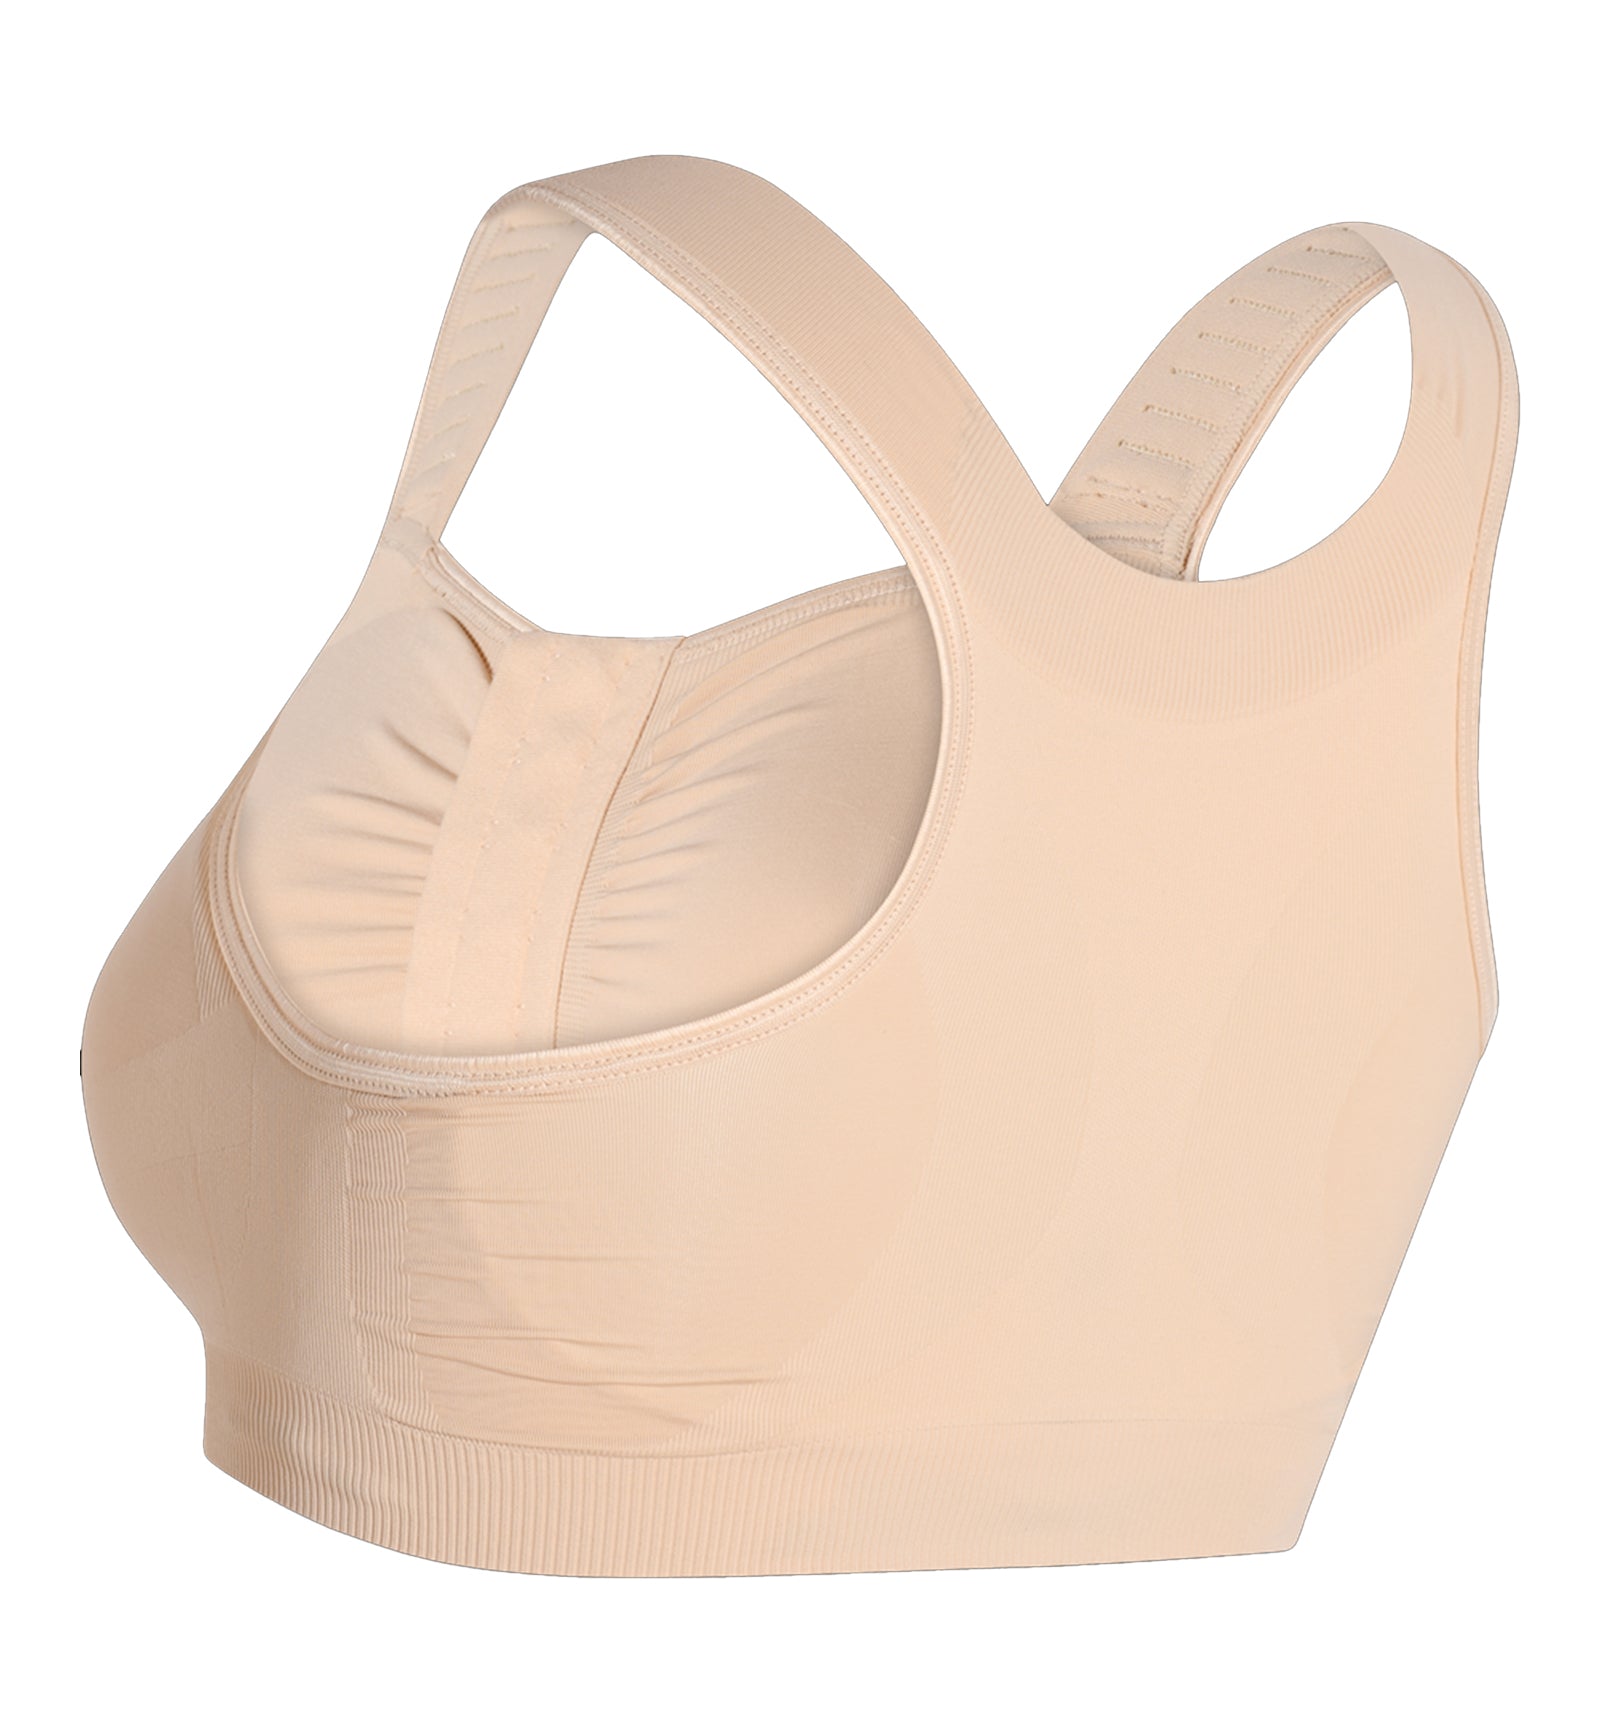 Carefix Mary Front Close Post-Op Bra (3343),Small,Nude - Tan,Small